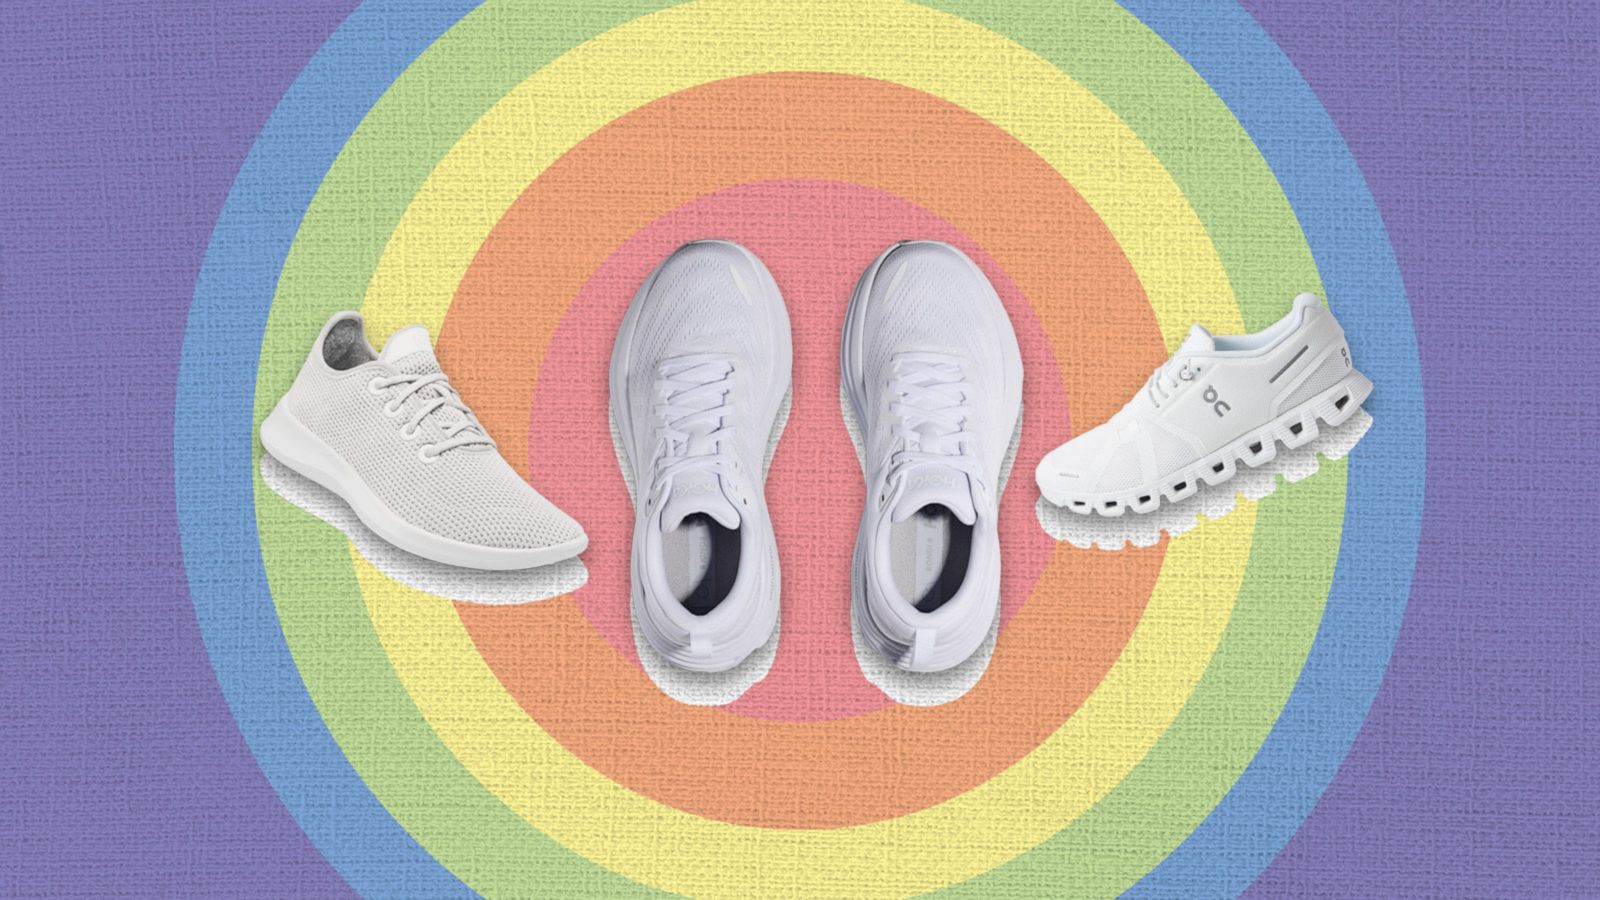 Titicacasøen Sygdom overfladisk 37 white sneakers for running, everyday wear and more - Good Morning America